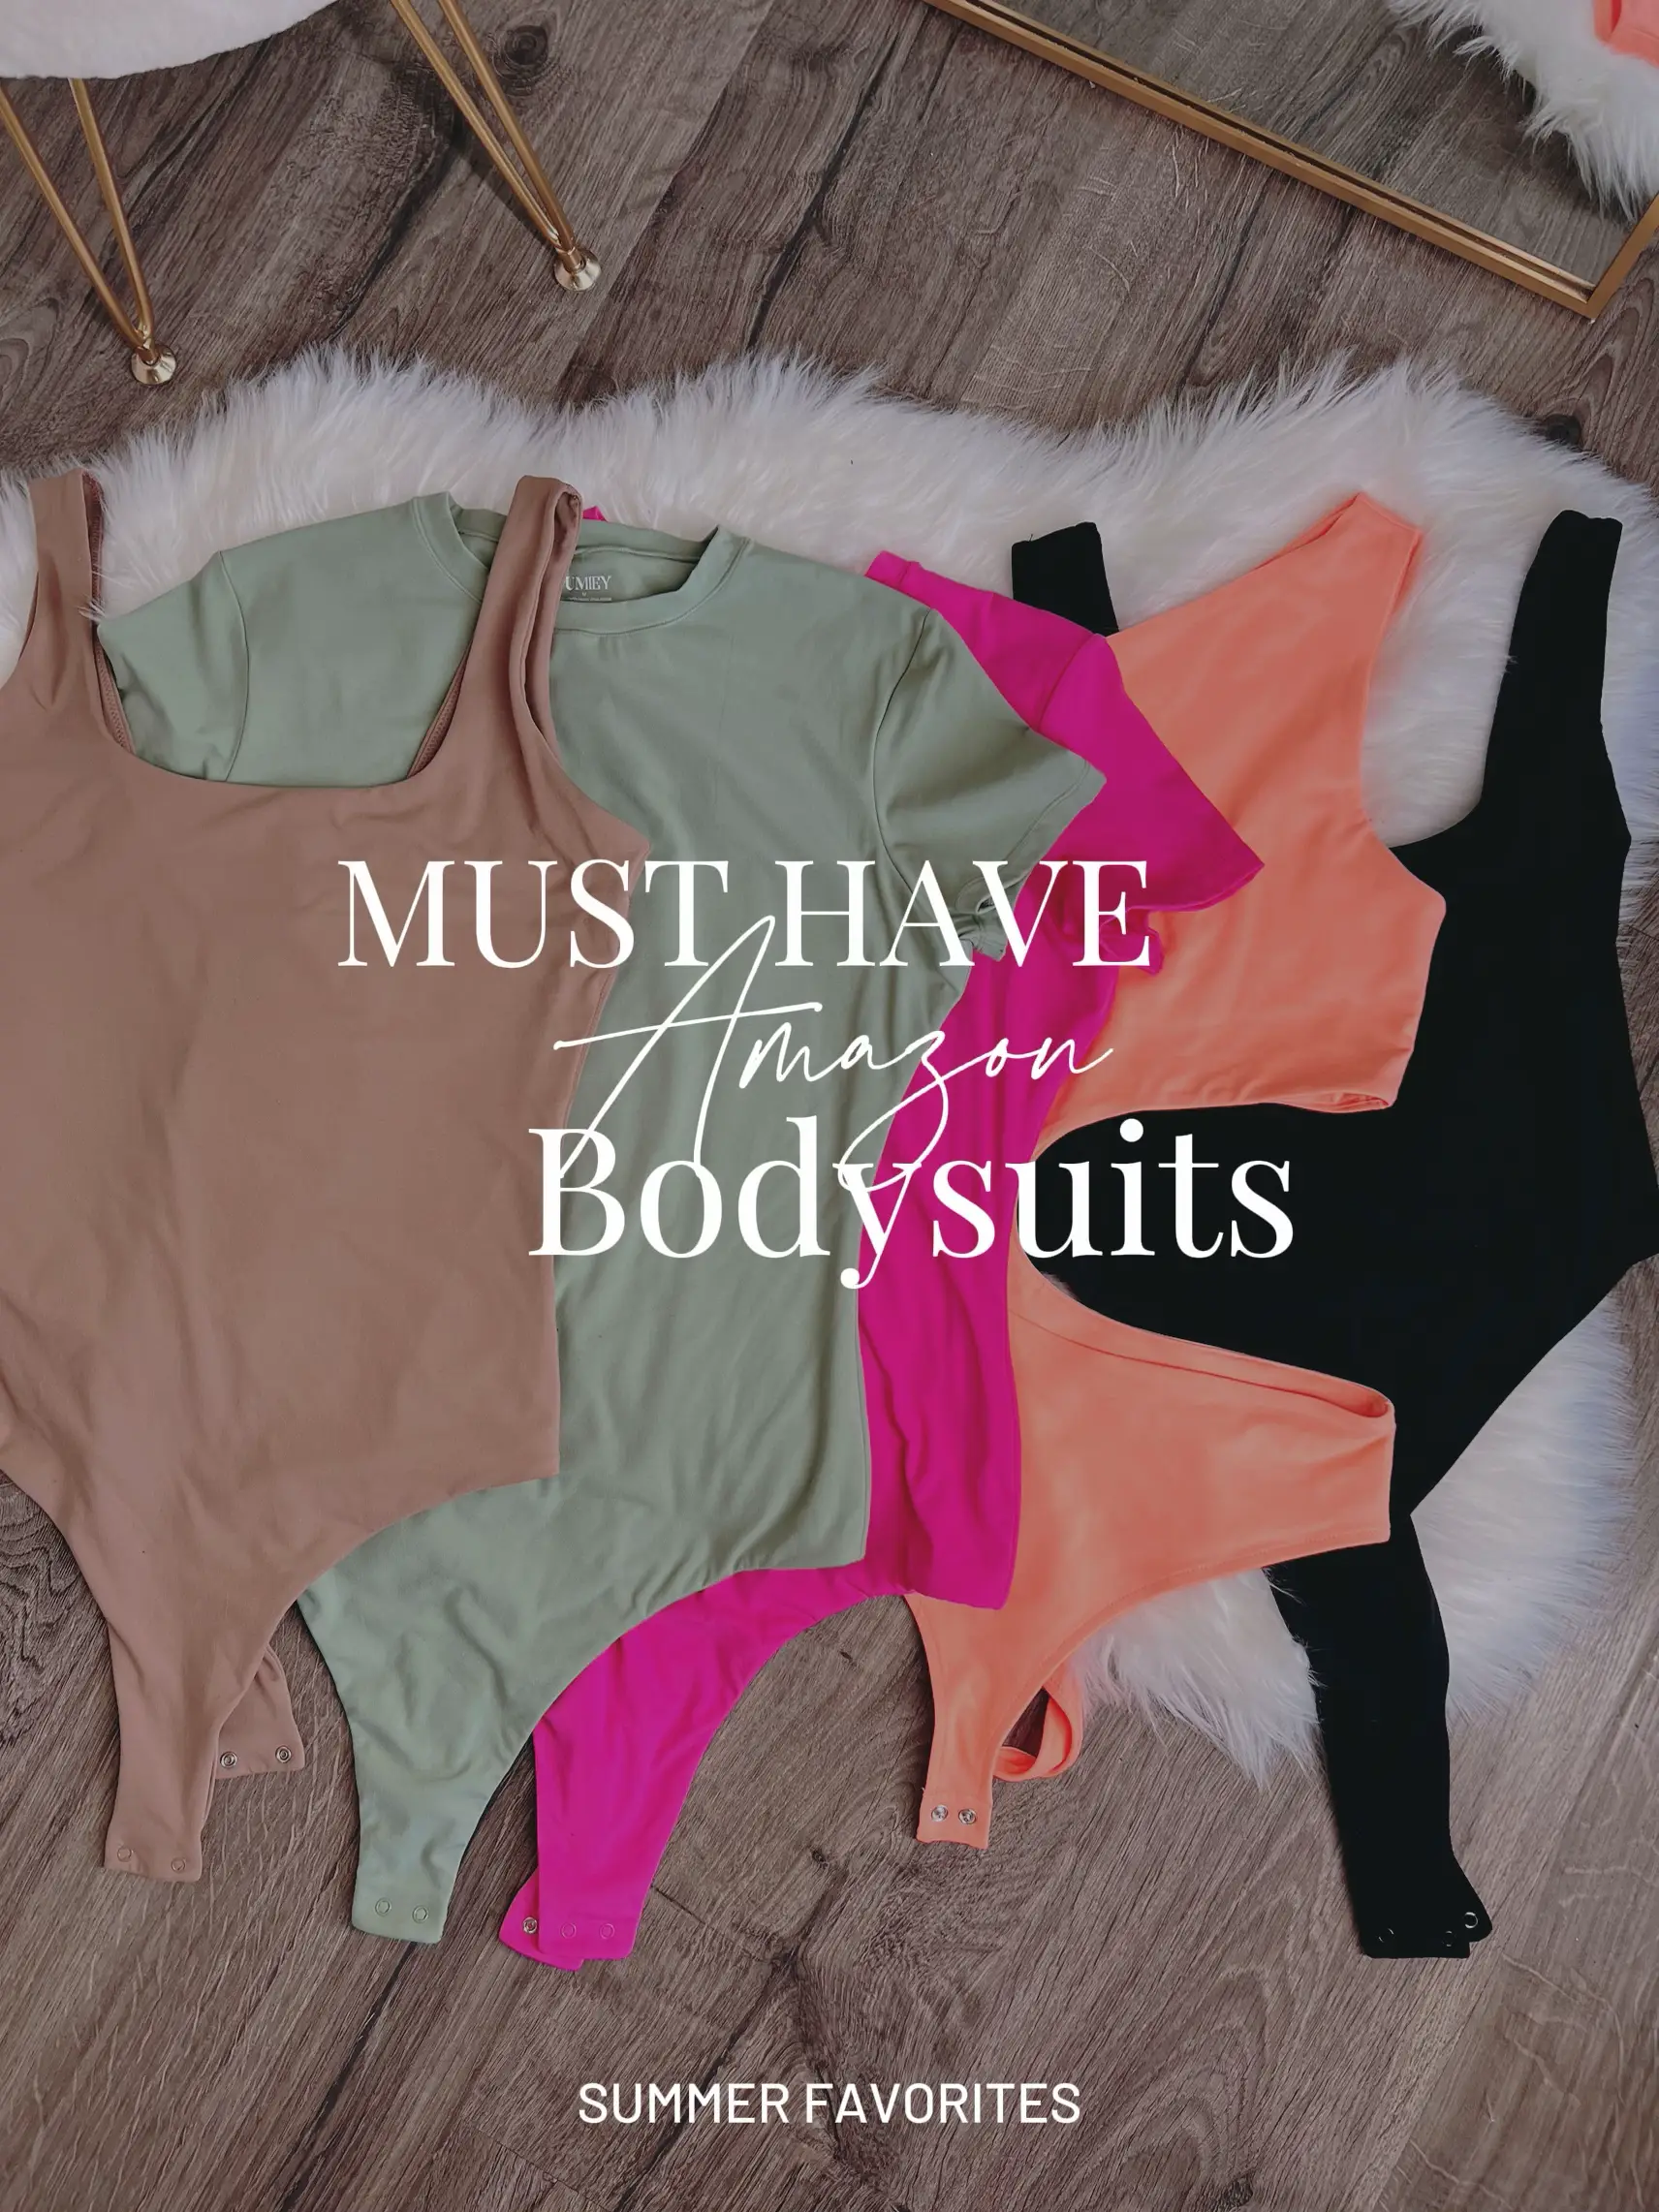 New Arrival🥳 😍 Slimming Bodysuit Shapewear is designed to provide  comfort, support, and a flattering silhouette, making it a must